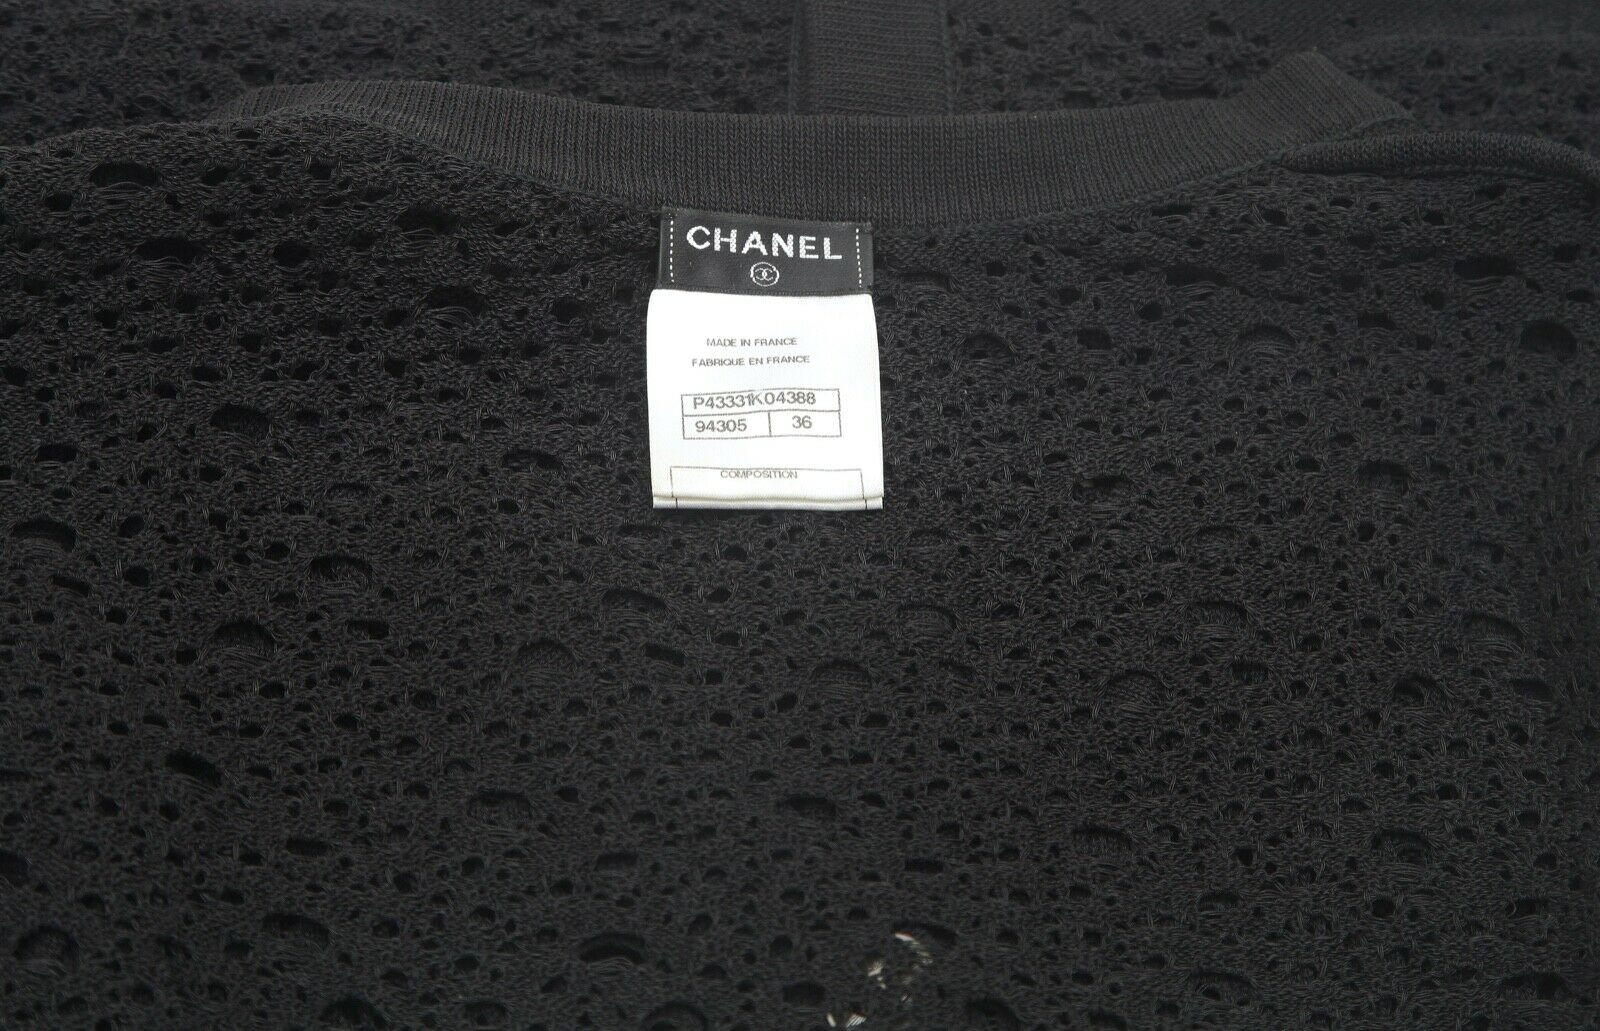 CHANEL Black Cardigan Sweater Knit V-Neck Buttons 3/4 Sleeves Sz 36 2012 4